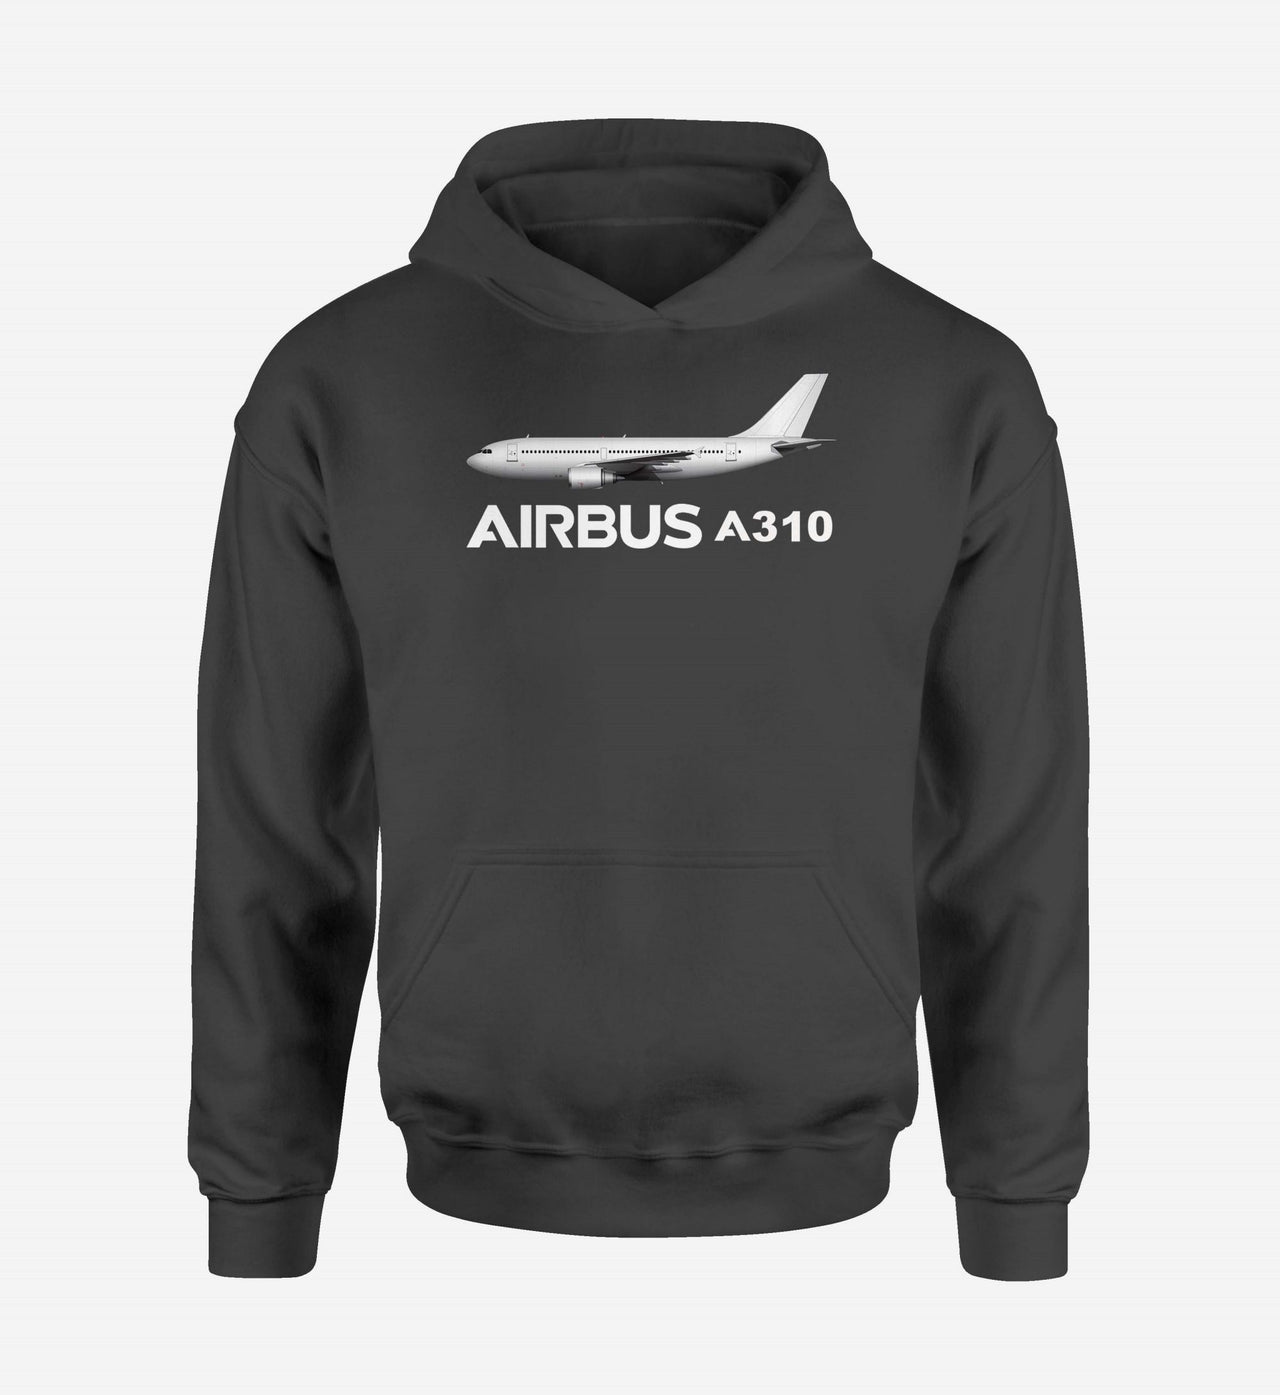 The Airbus A310 Designed Hoodies